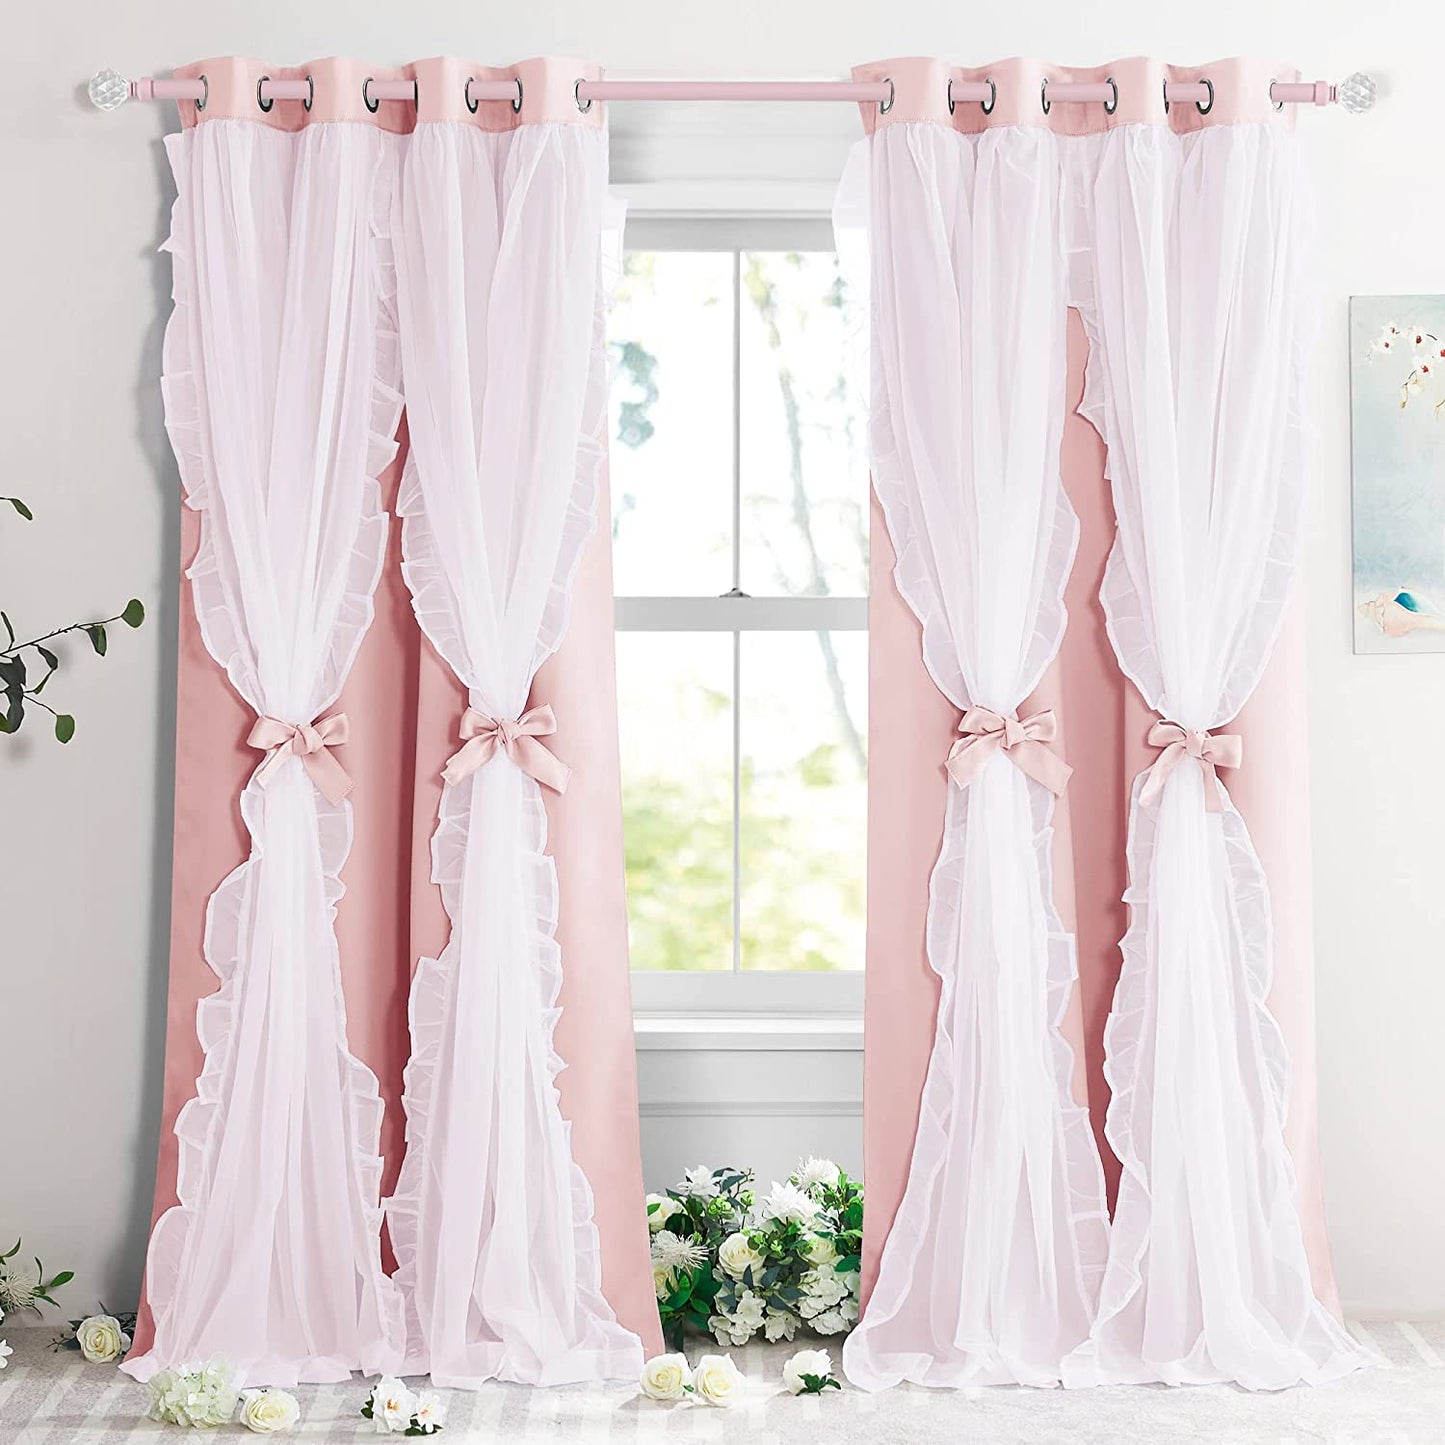 PONY DANCE Blackout Curtains for Living Room Decor Window Treatment Double Layer Drapes Ruffle Sheer Overlay Farmhouse Rustic Design, W 52 X L 84 Inches, Sage Green, 2 Panels  PONY DANCE Blush Pink 52" X 84" 